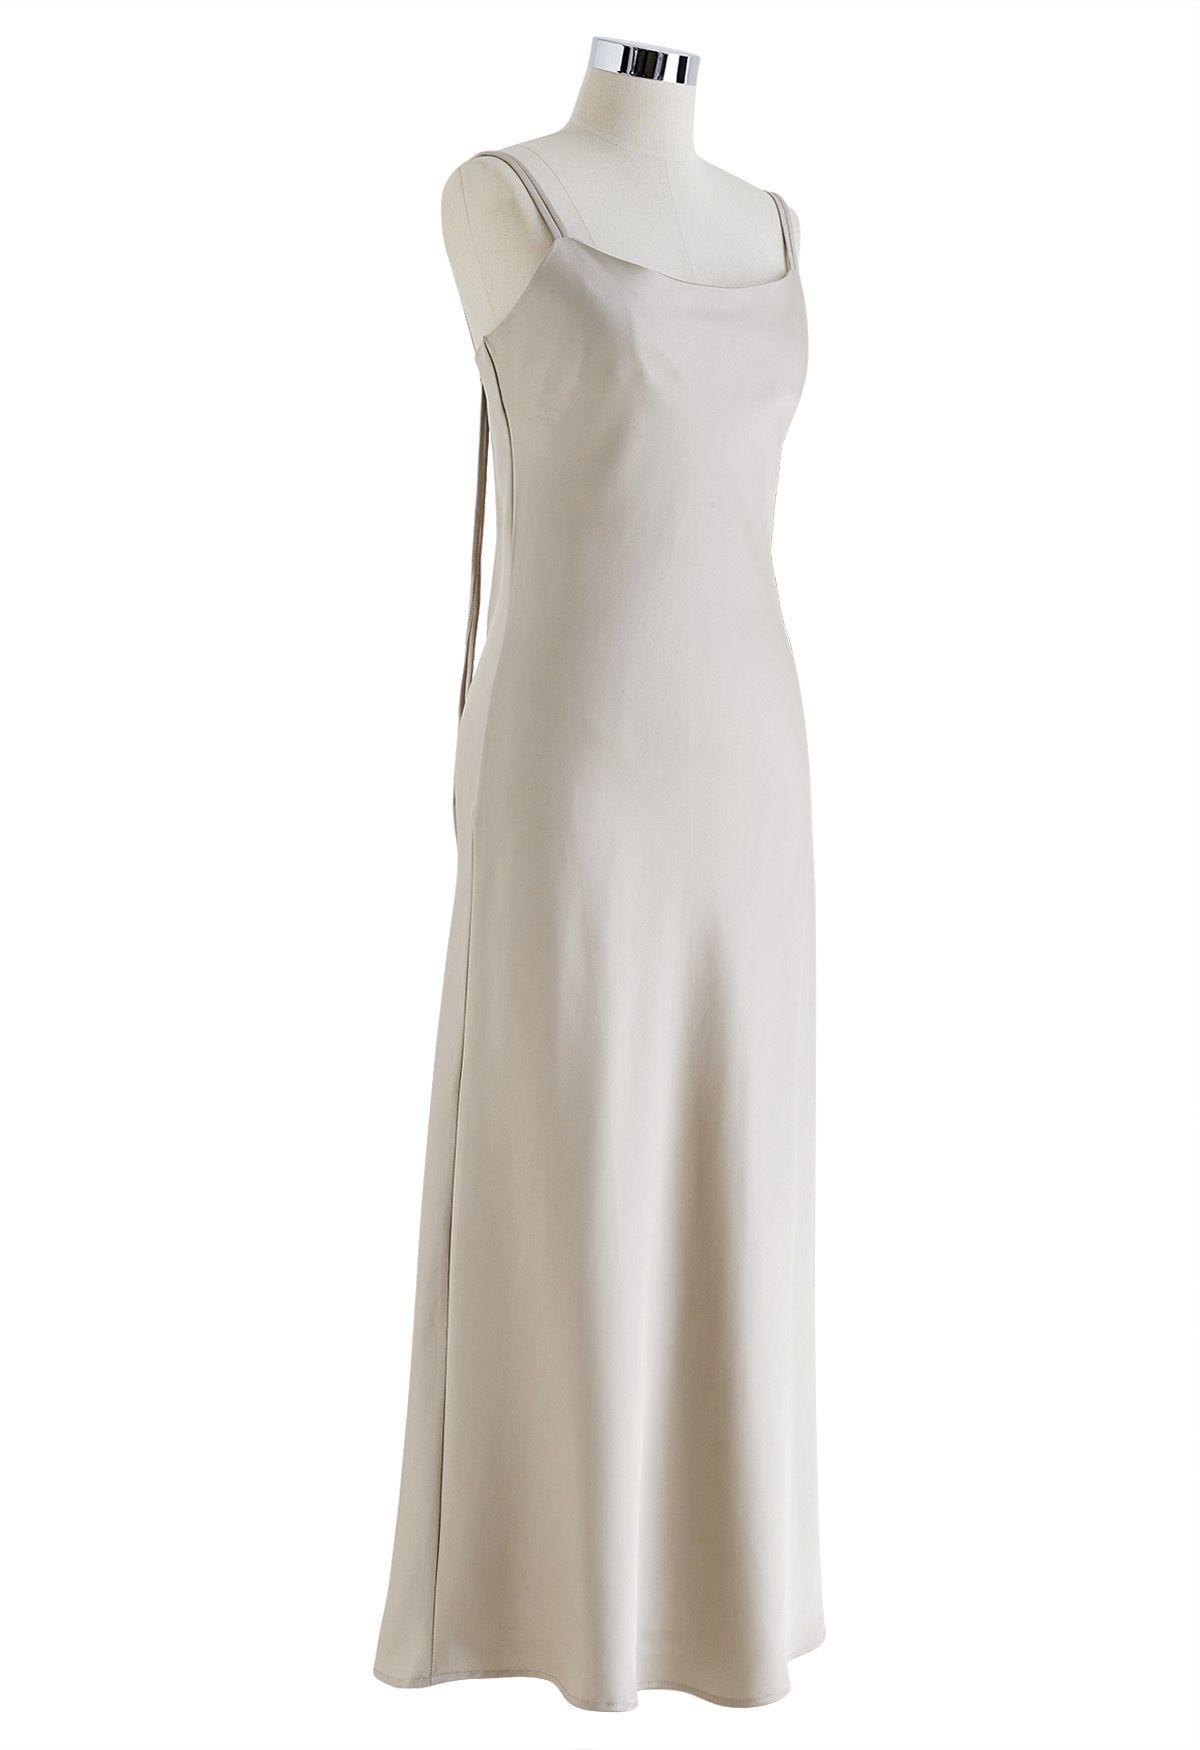 Double Straps Satin Cami Dress in Ivory